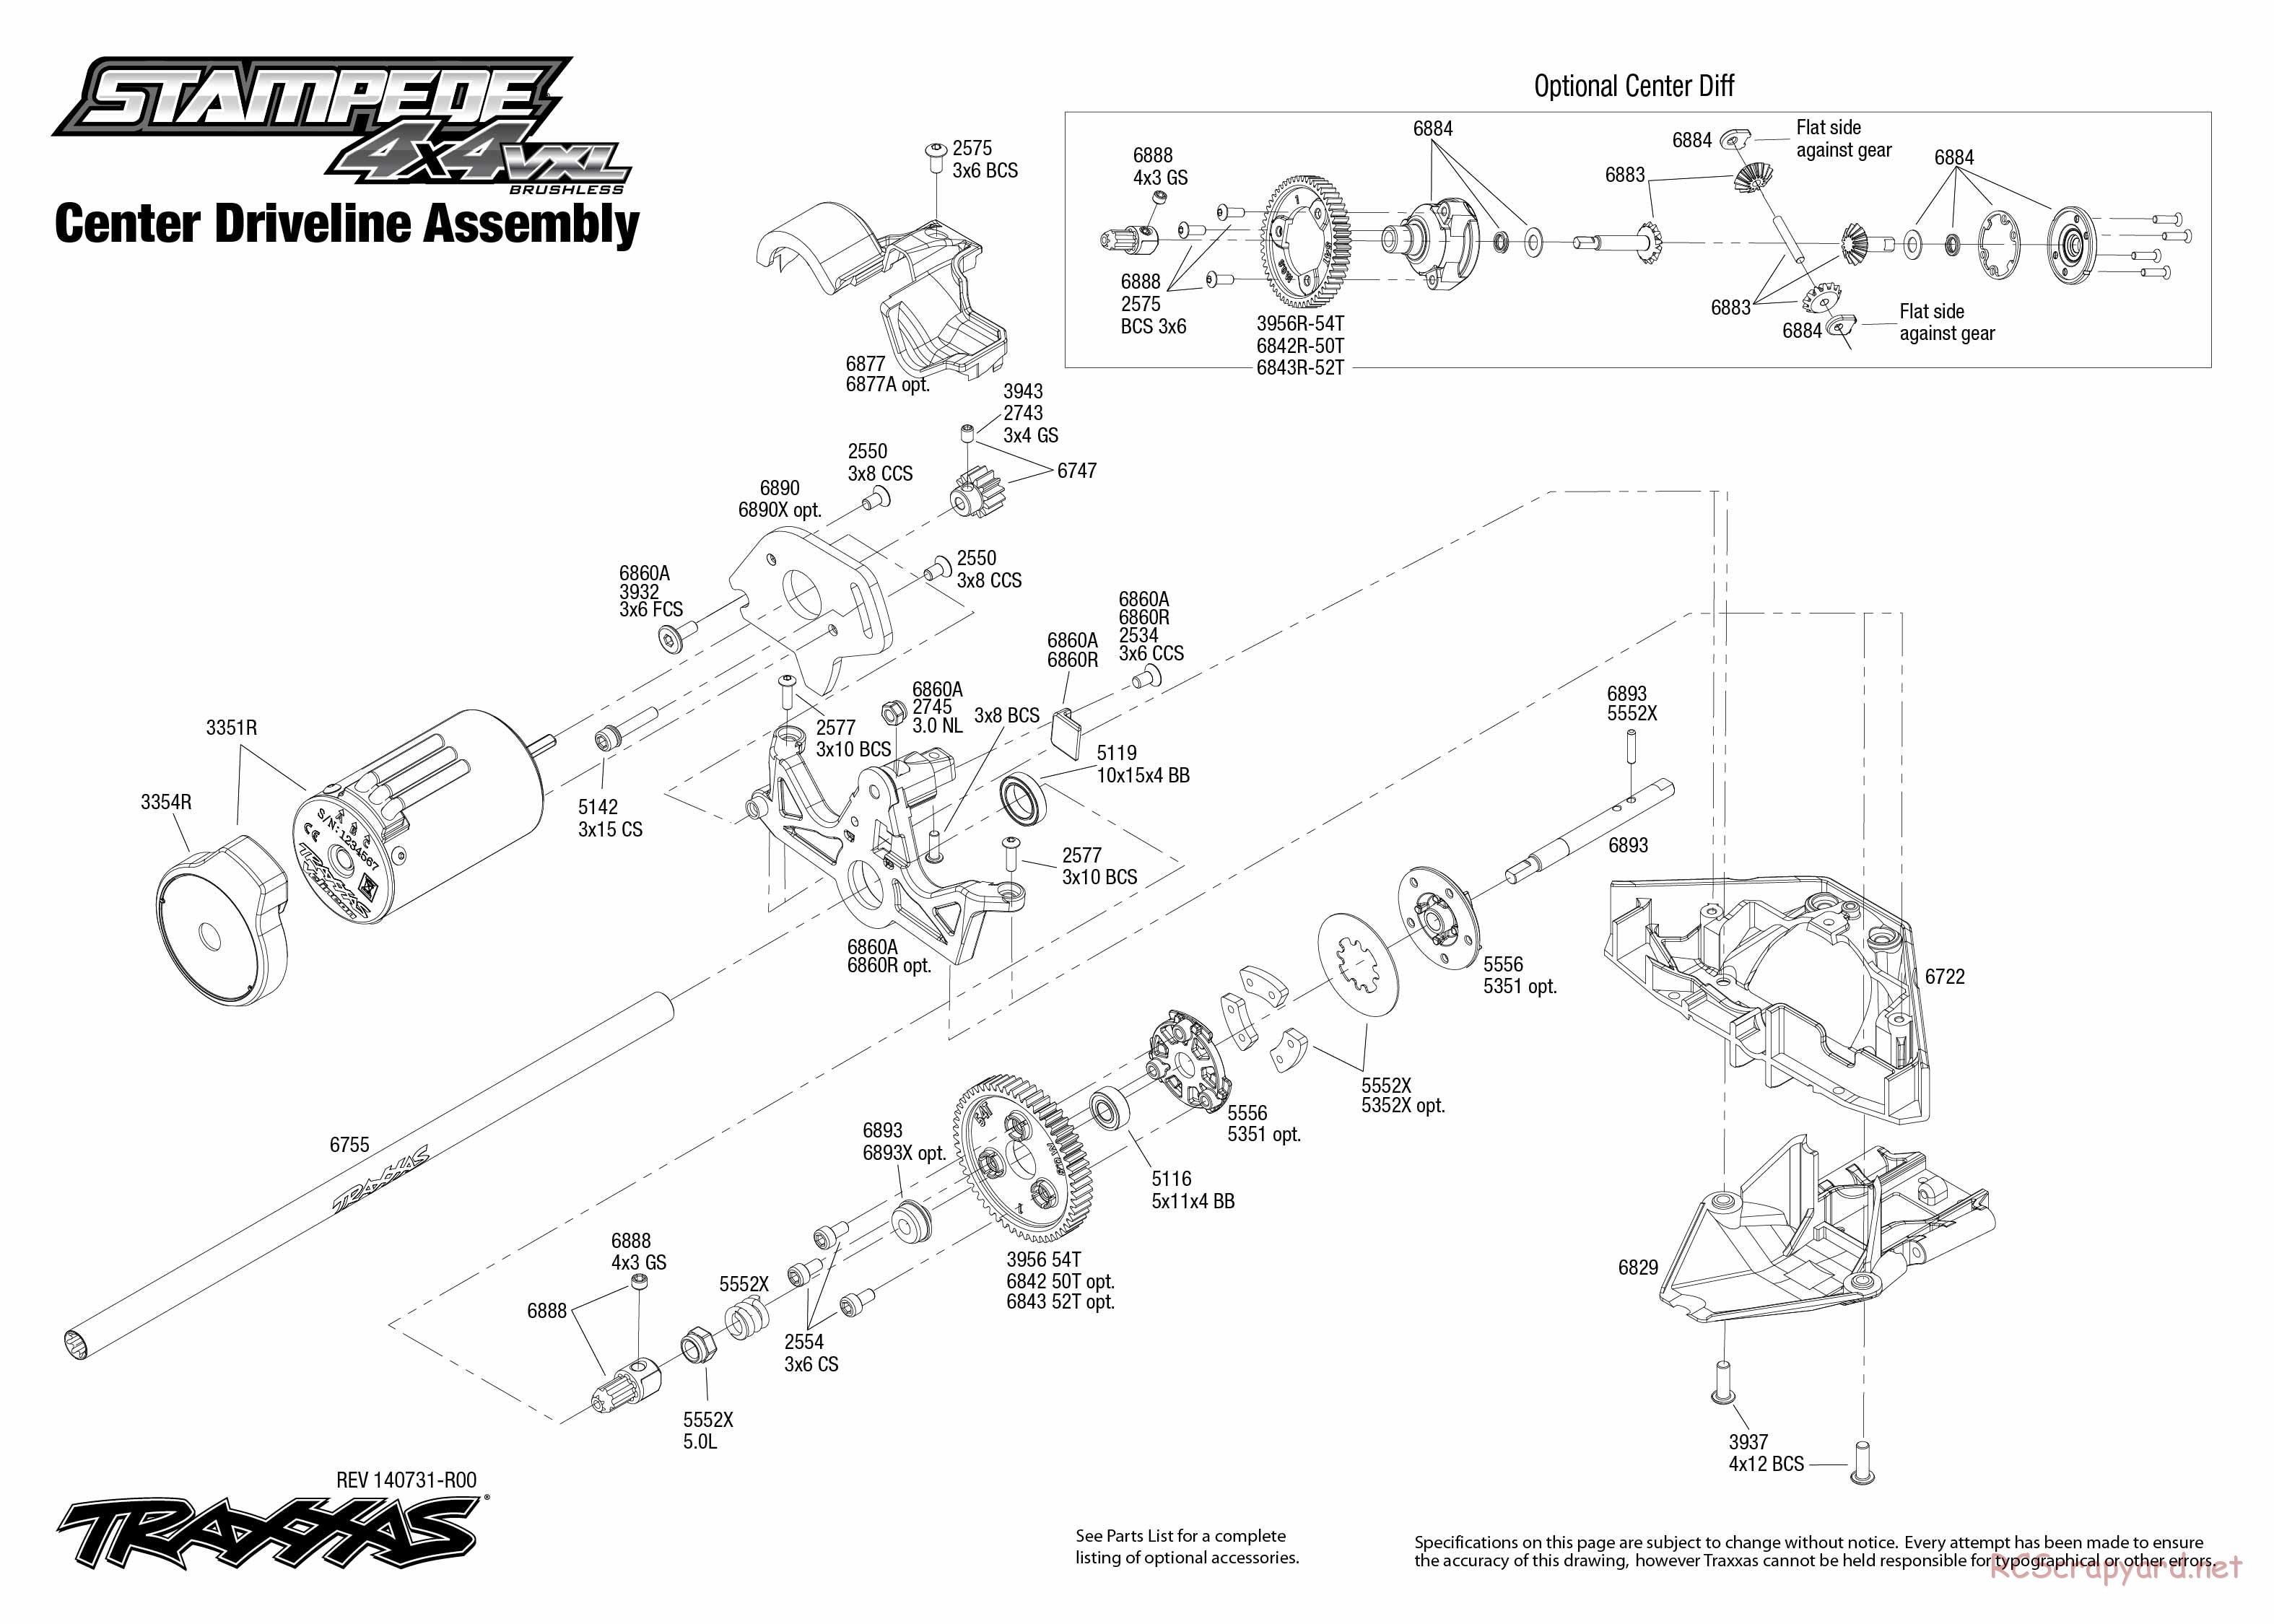 Traxxas - Stampede 4x4 VXL (2015) - Exploded Views - Page 4